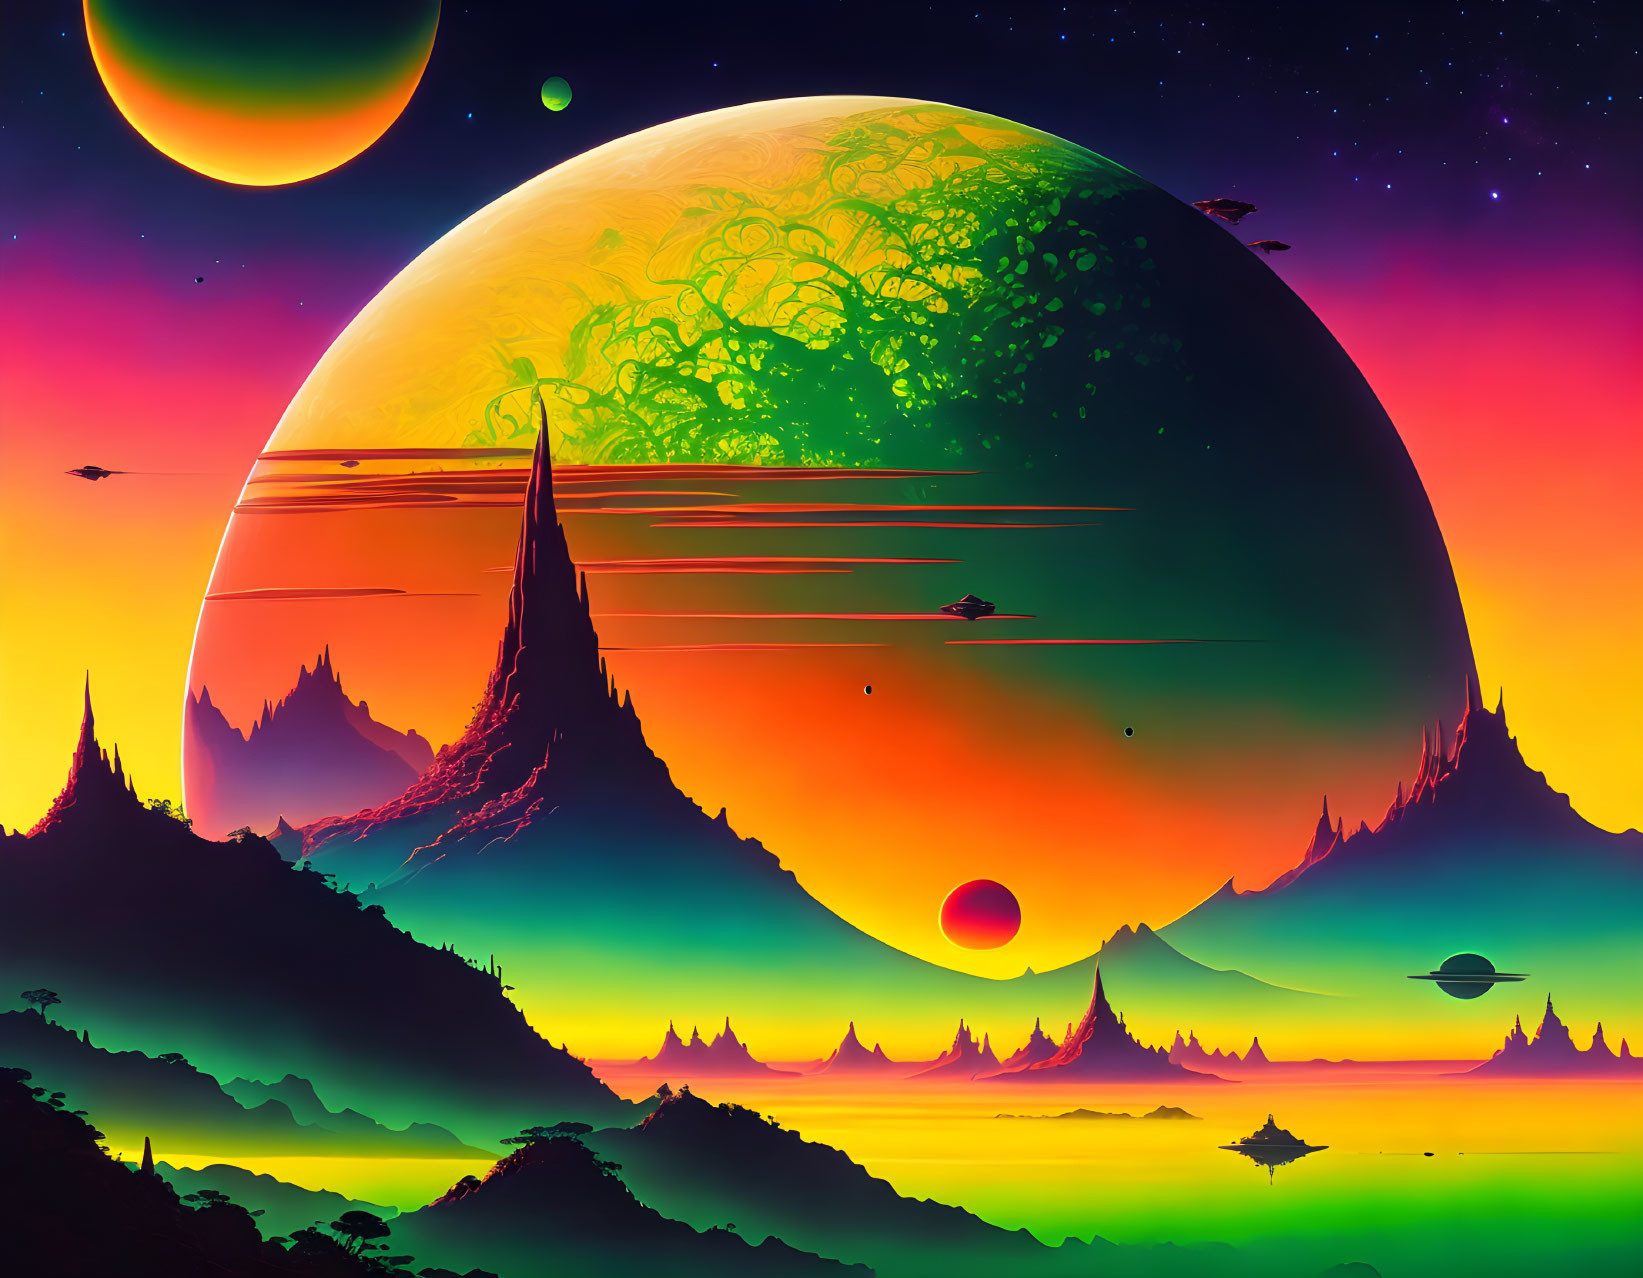 Colorful science fiction landscape with large planets, futuristic mountains, and alien spacecraft.